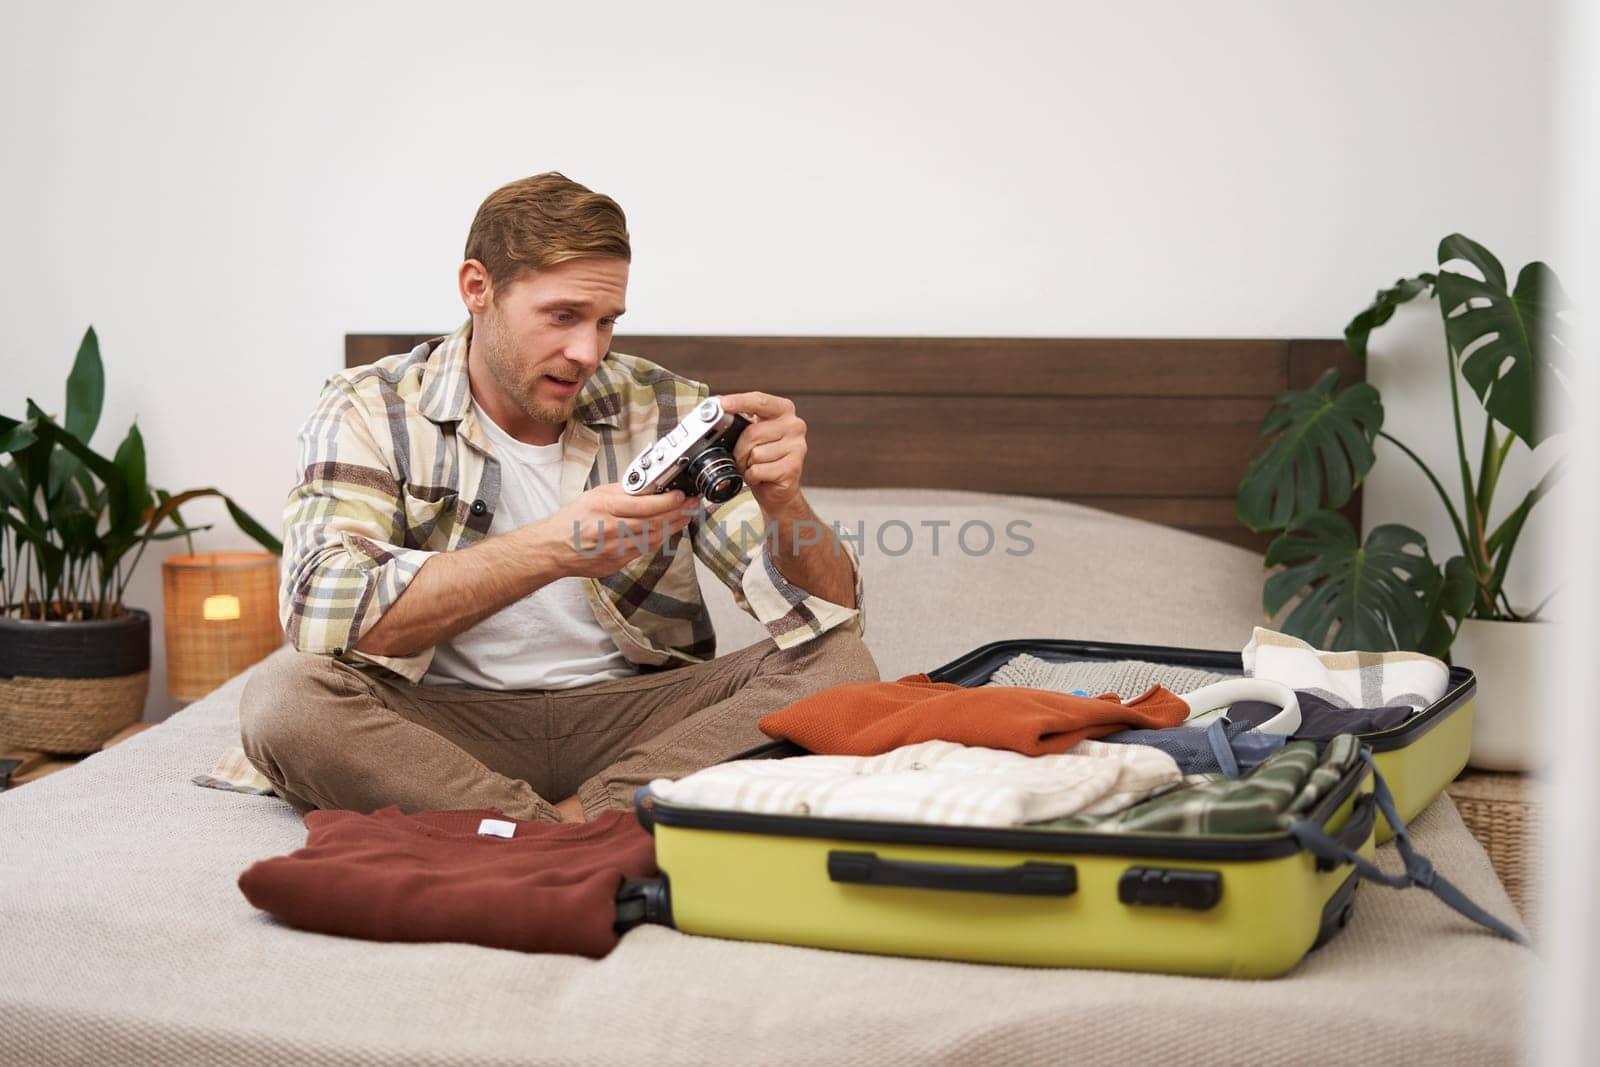 Portrait of young man looking at his digital camera screen, checking photo album on gadget, unpacking suitcase after holiday, travelling with luggage, sitting in hostel on a bed.